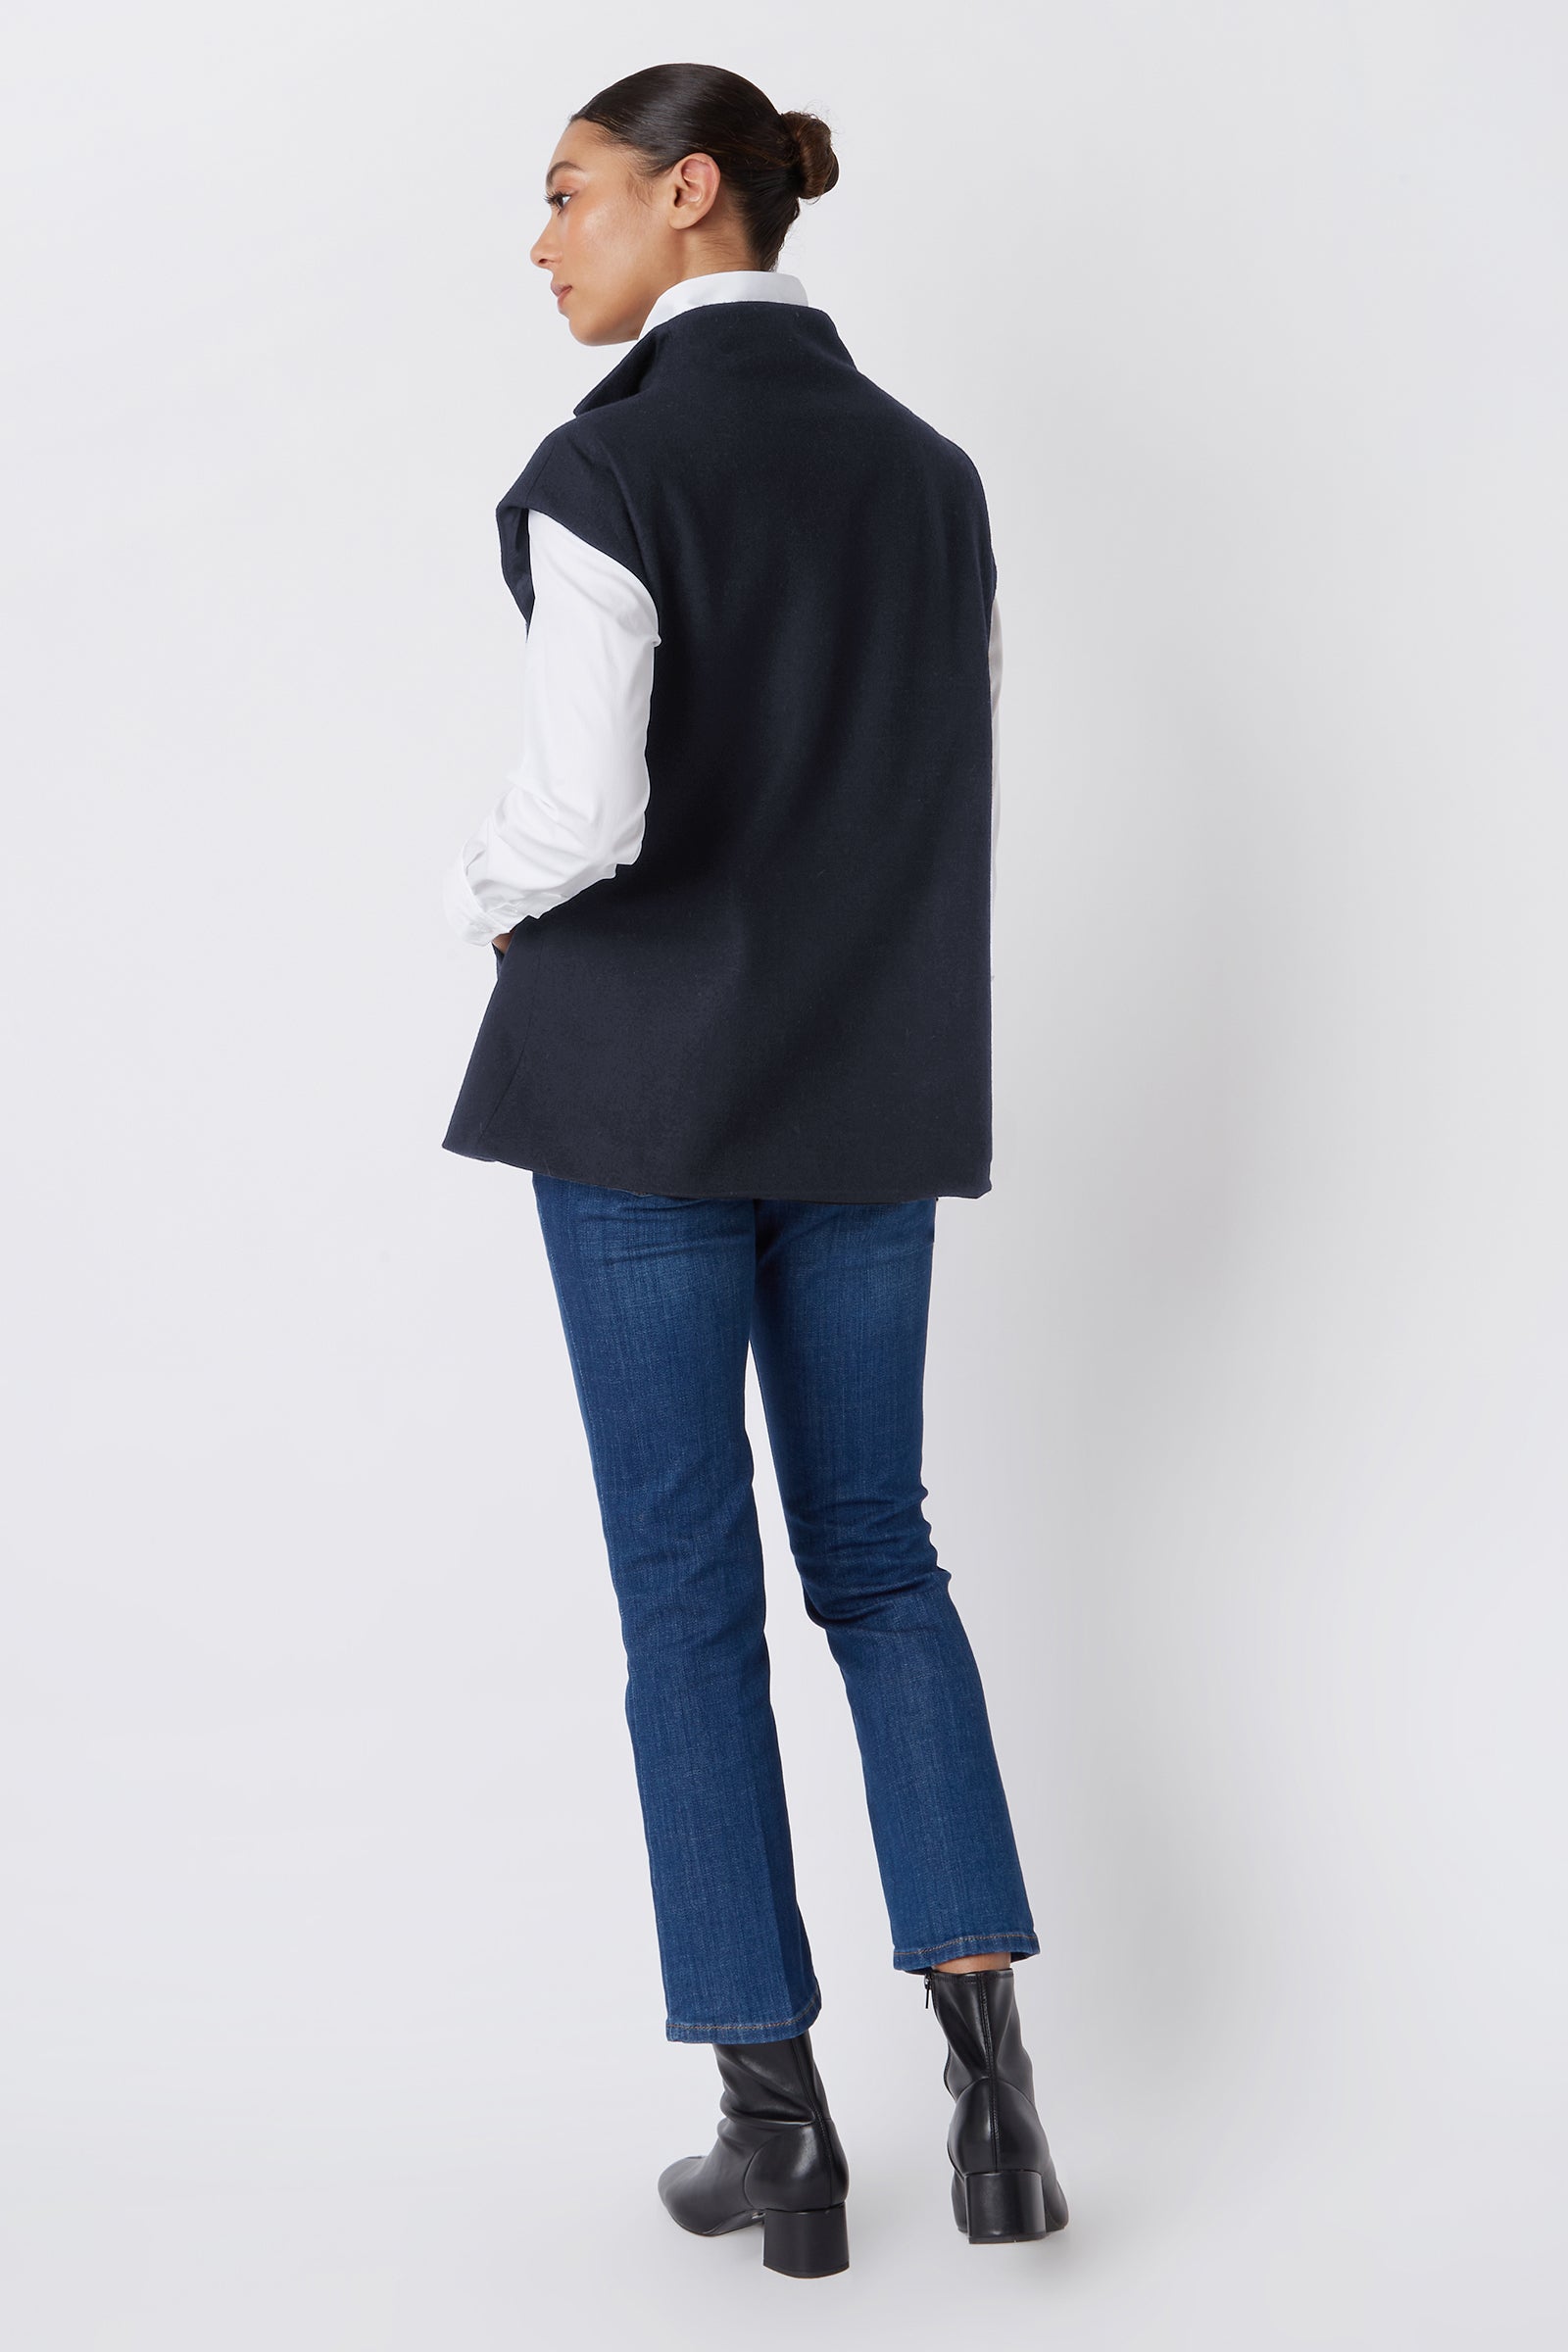 Kal Rieman Anne Collared Zip Vest in Midnight Felted Jersey on Model Looking Down Cropped Front View